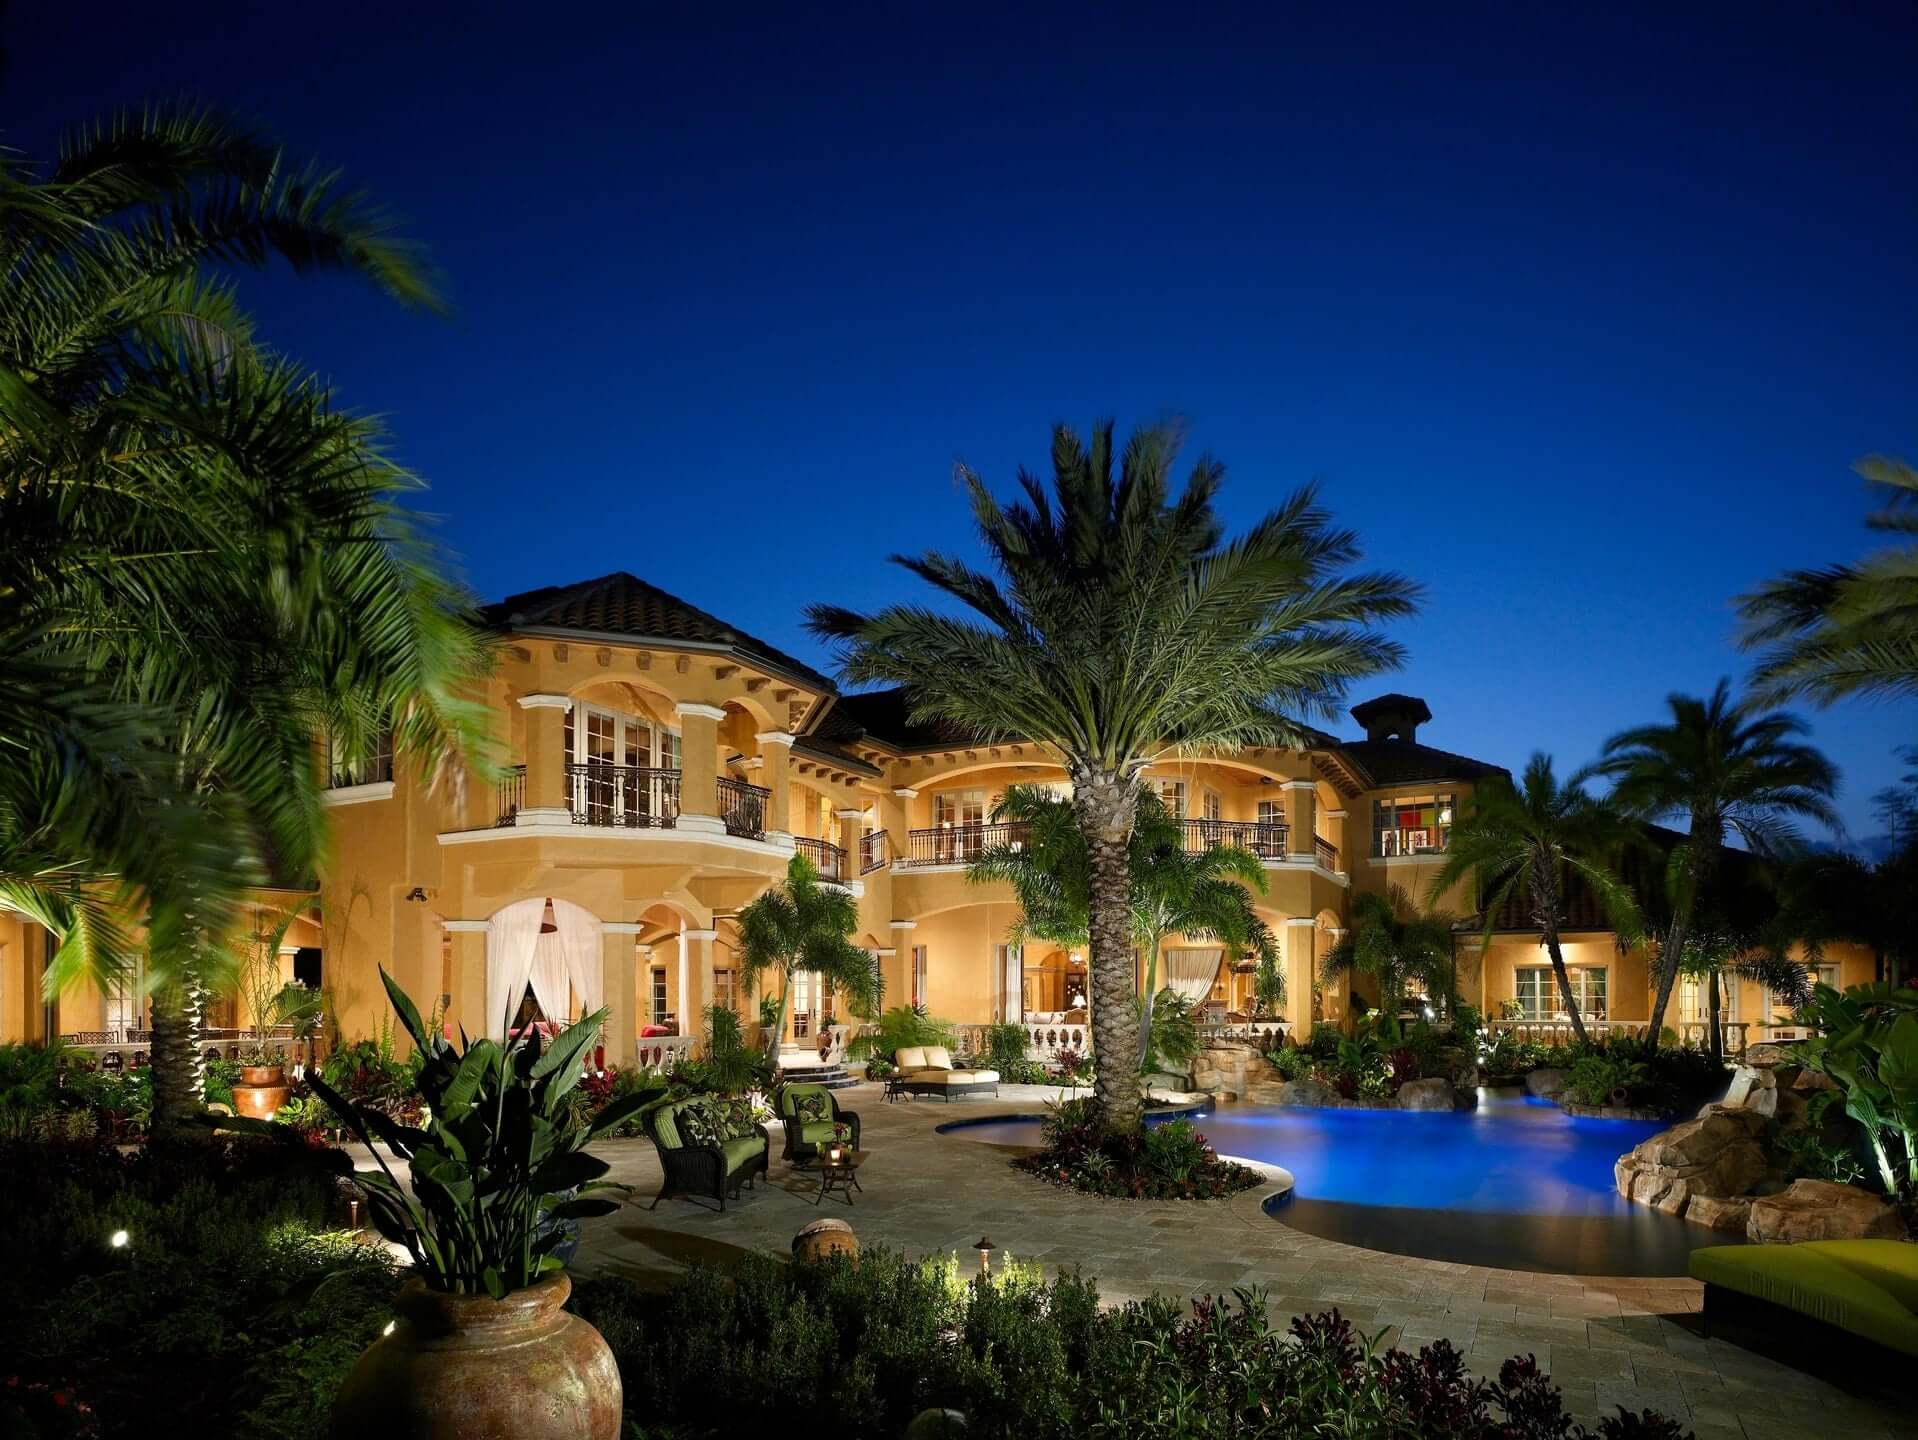 house with palm trees